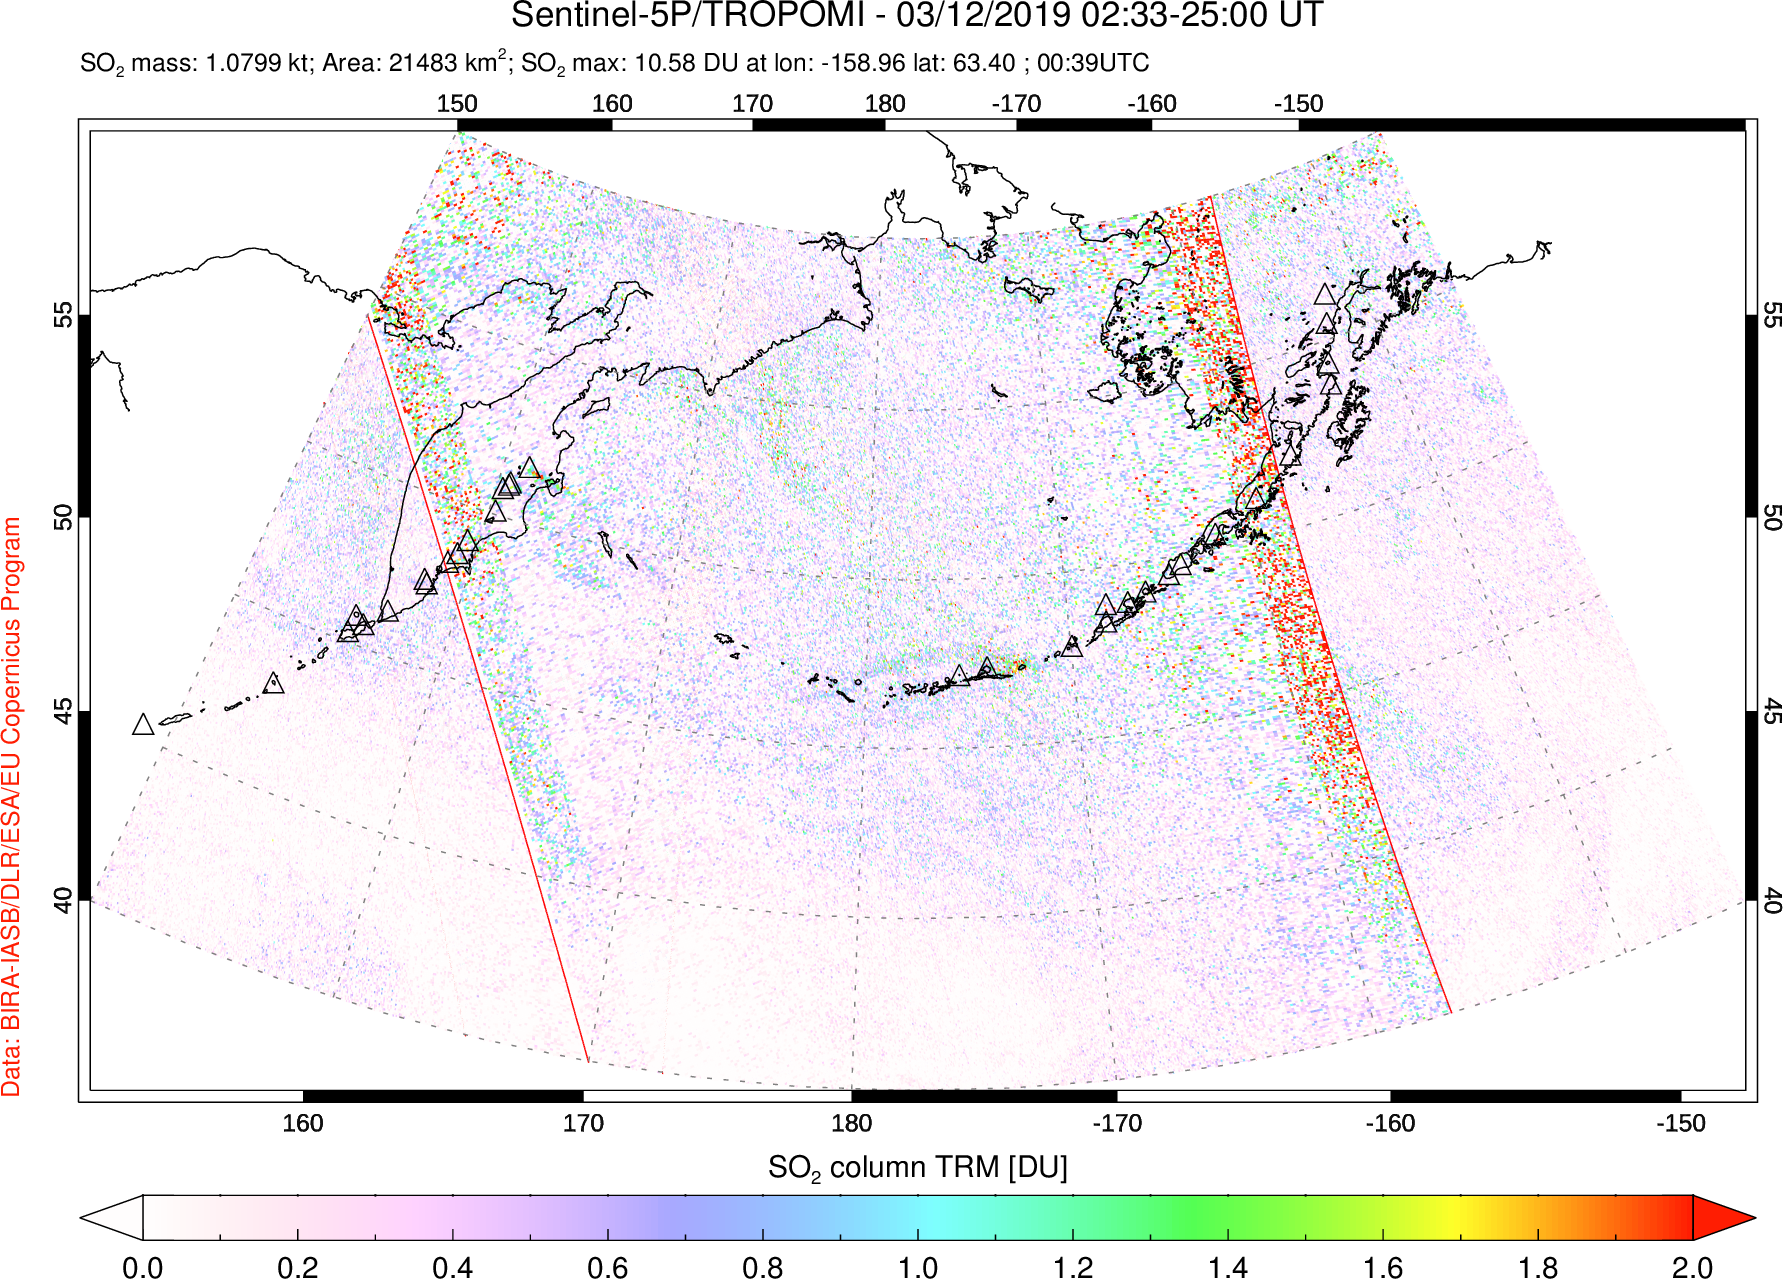 A sulfur dioxide image over North Pacific on Mar 12, 2019.